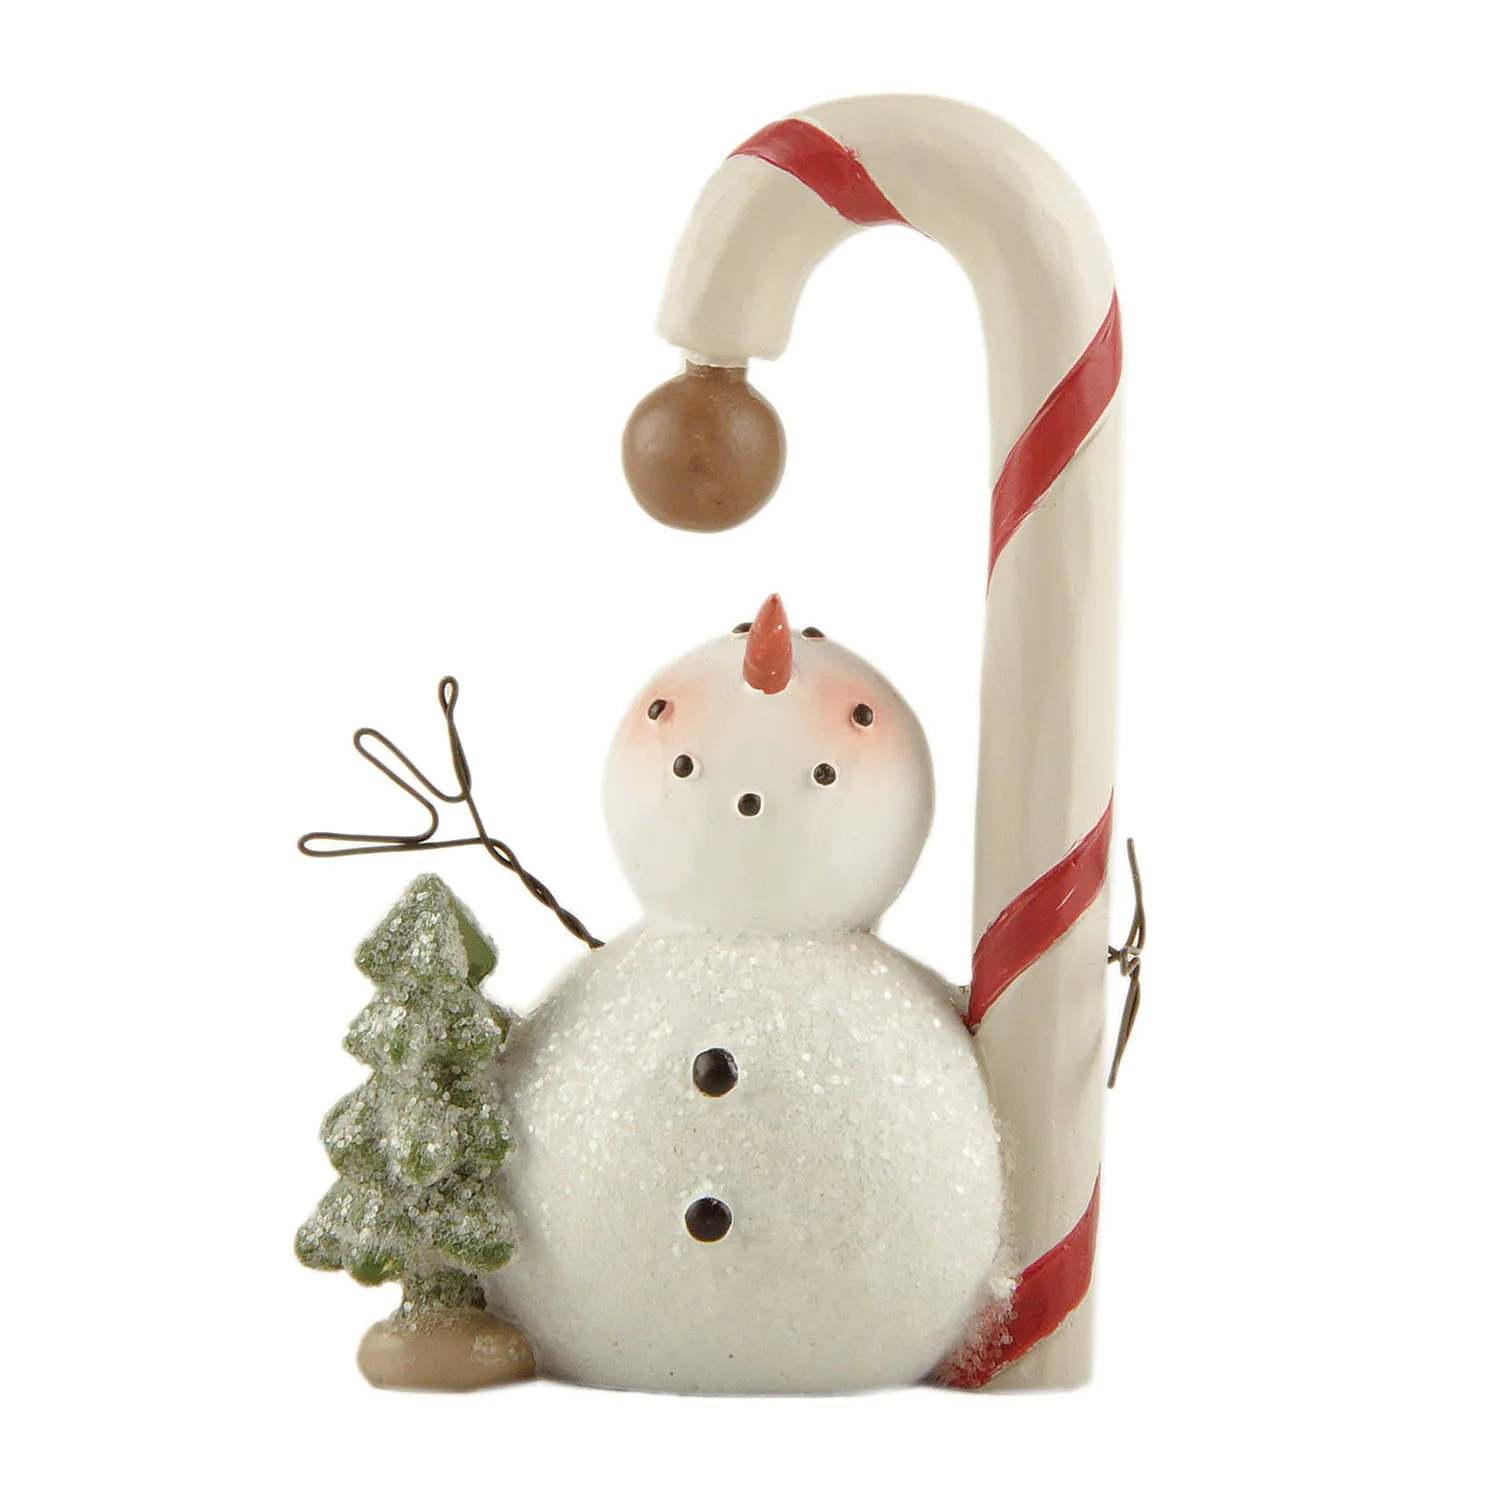 Factory Handmade Resin Snowman Figurine Cute Snowman with Candy Cane&Tree Statue for Desktop Decor 238-13932